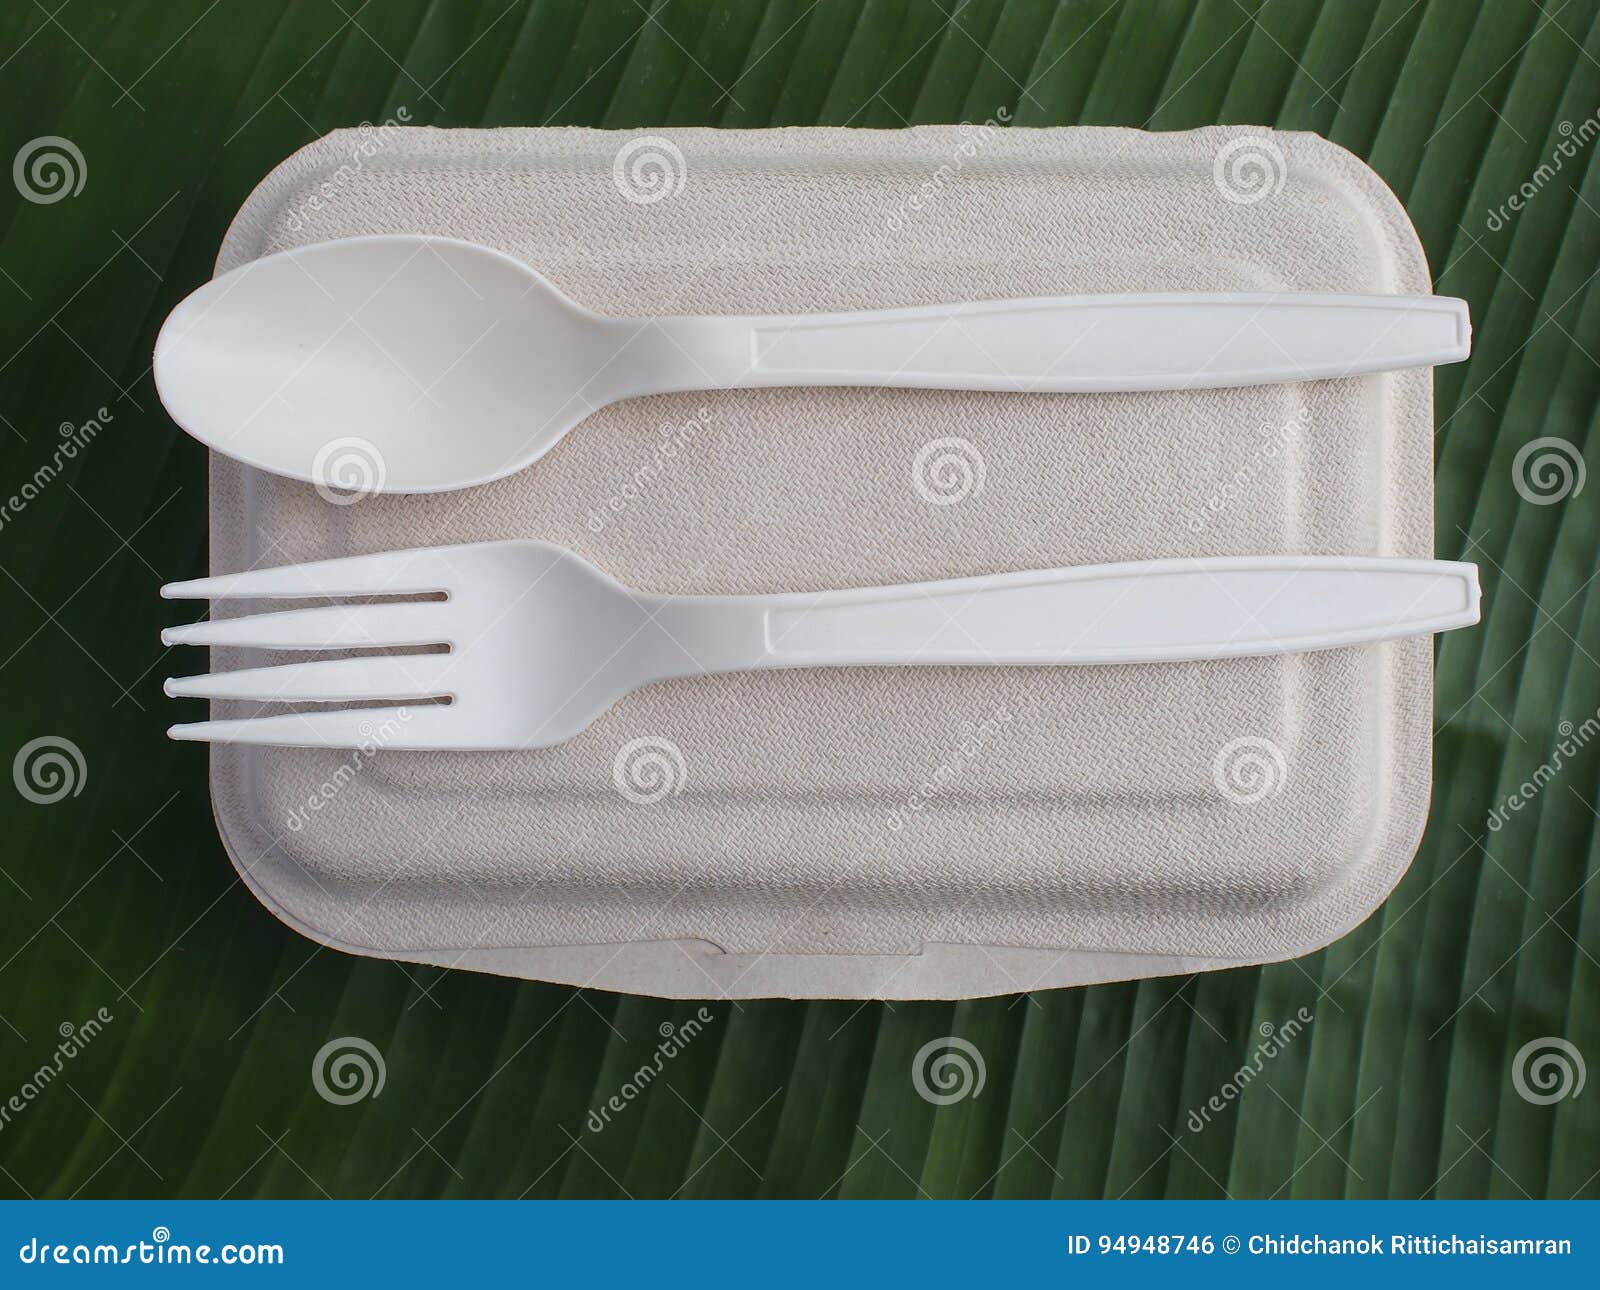 bioplastic spoon fork and disposable lunch box on banana leaf